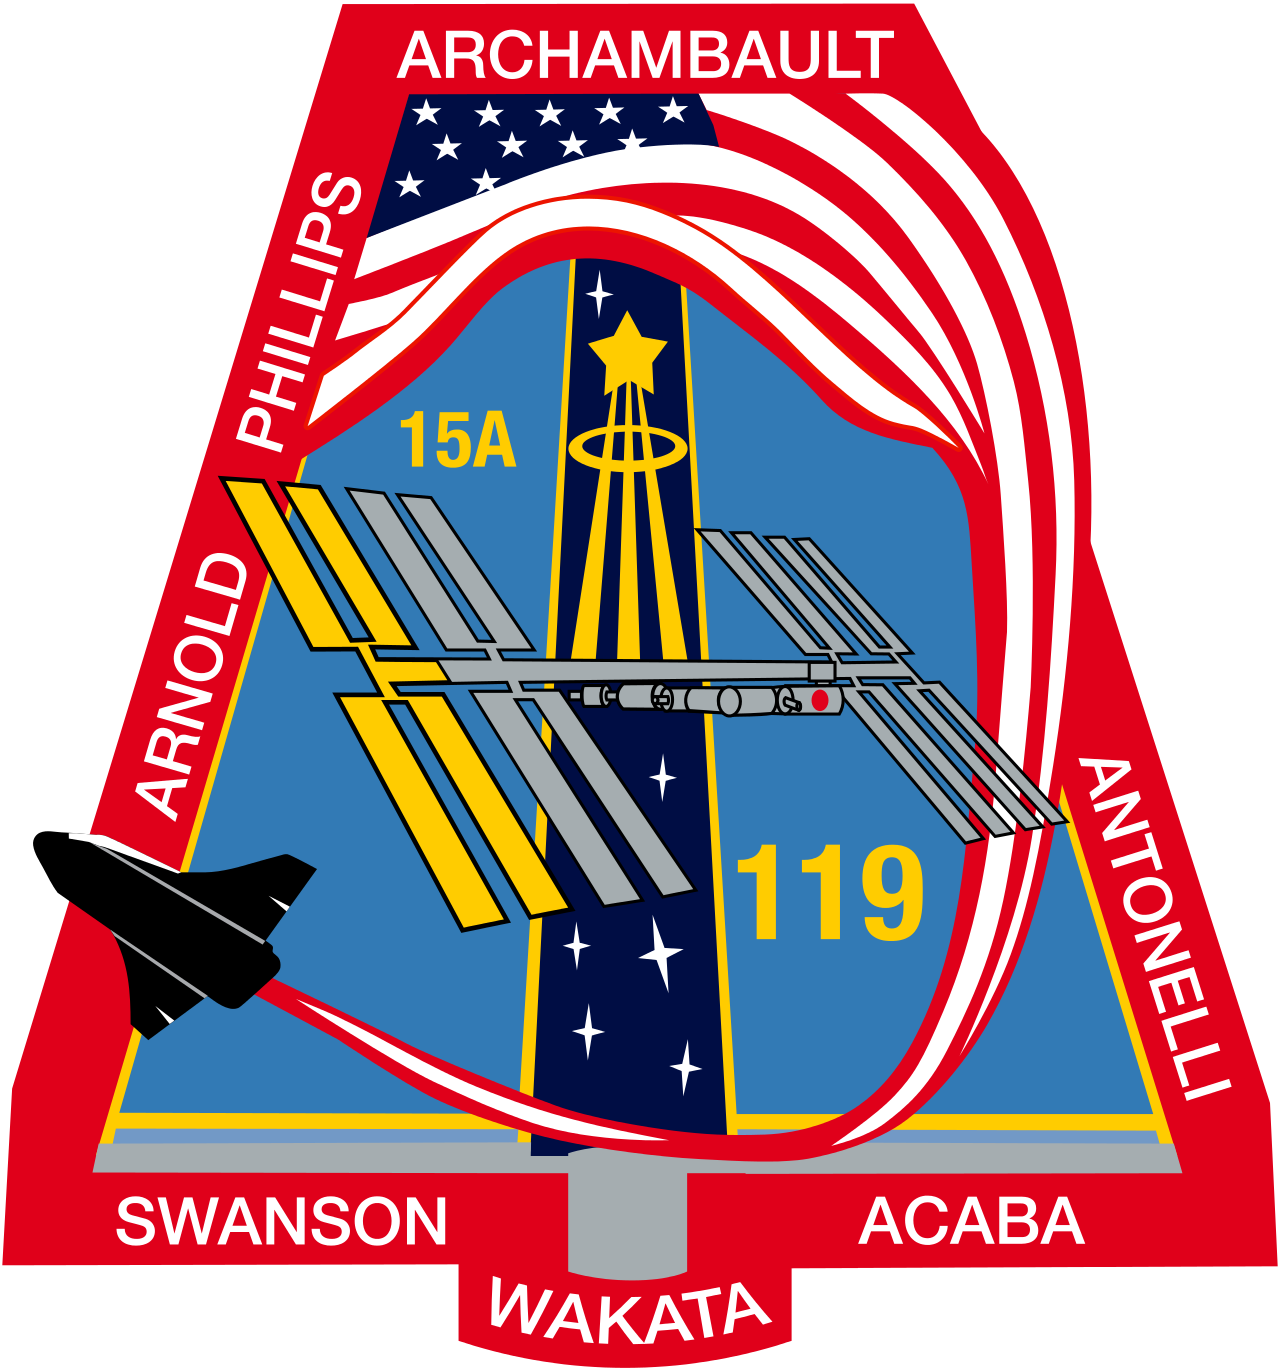 Mission patch for STS-119